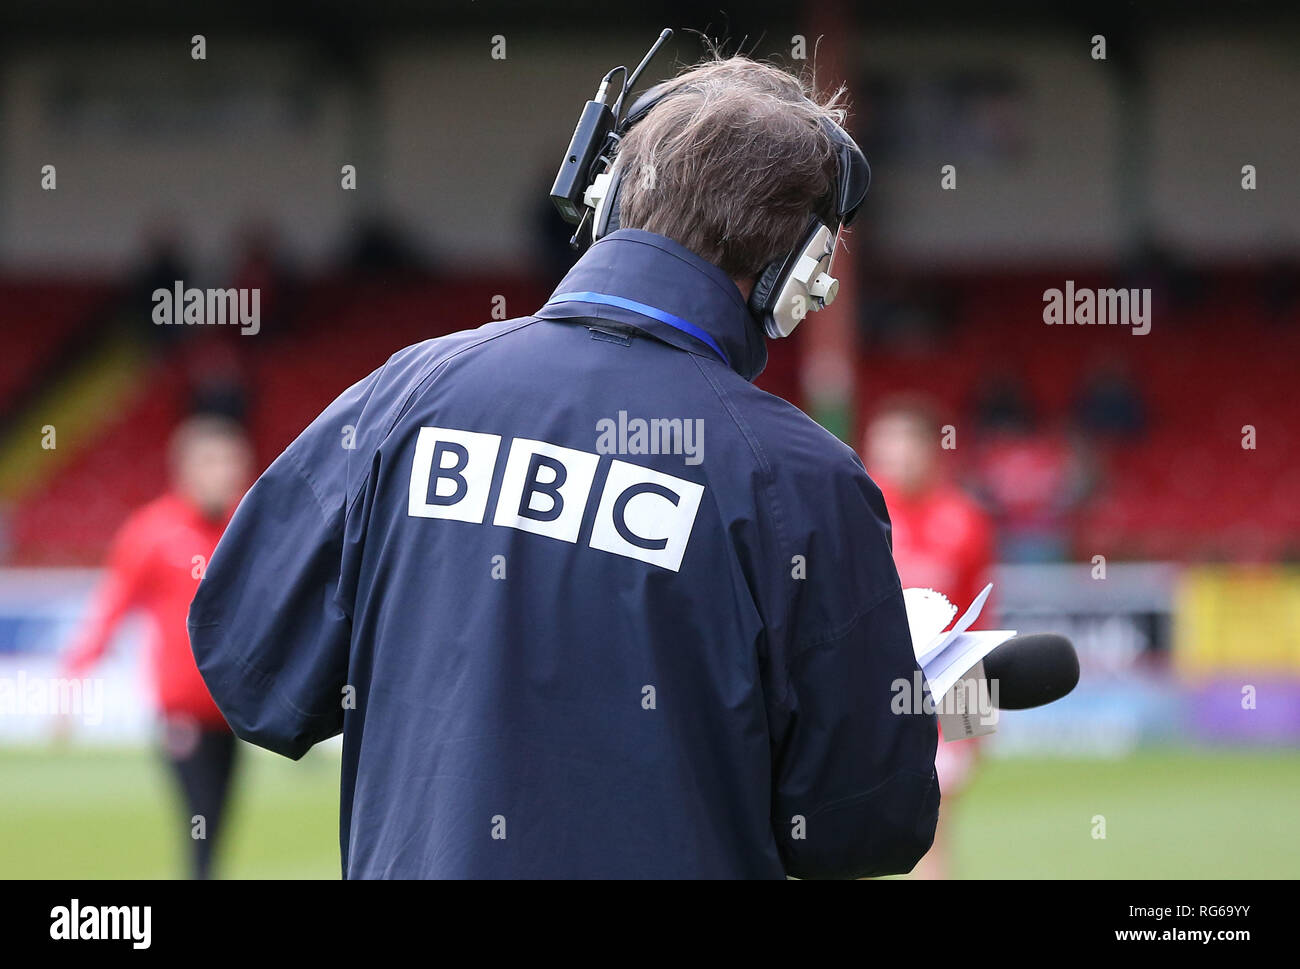 BBC radio journalist broadcasting during the EFL League 2 match between Swindon Town and Crawley Town at the County Ground in Swindon. 26 January 2019. Editorial use only. No merchandising. For Football images FA and Premier League restrictions apply inc. no internet/mobile usage without FAPL license - for details contact Football Dataco Stock Photo